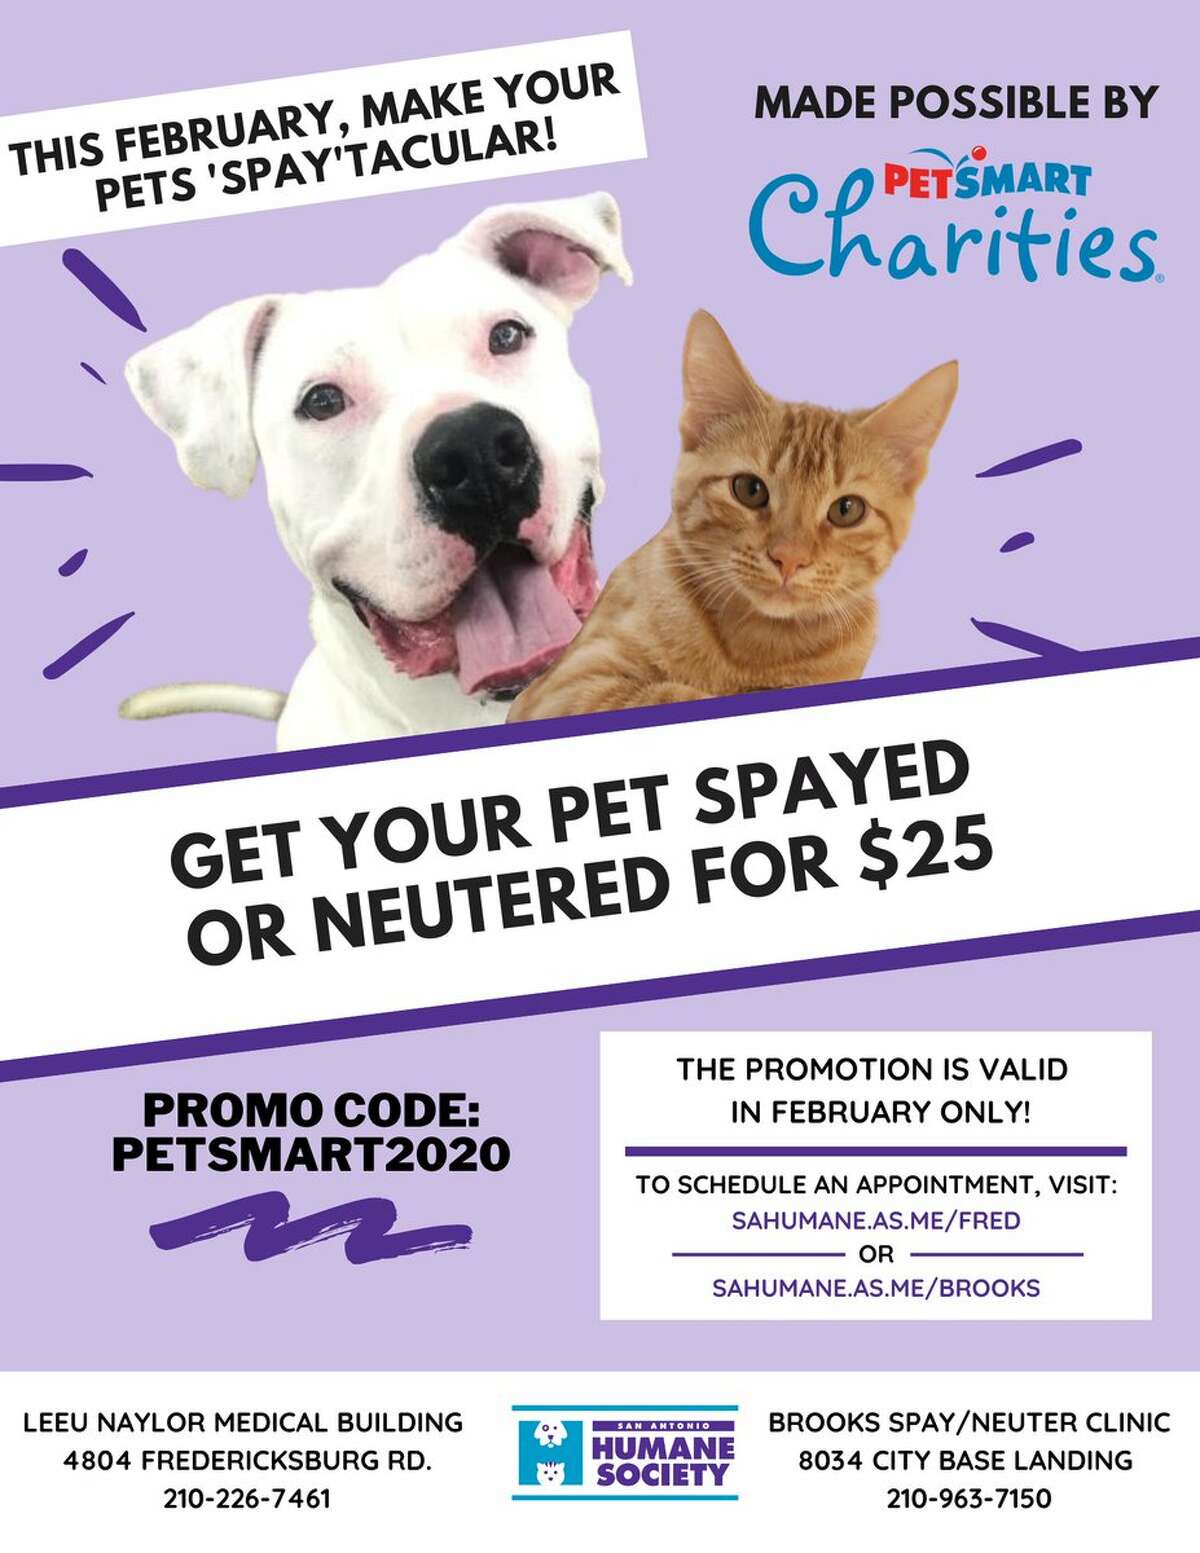 Spay and neuter your pets for only $25 during the month of February.